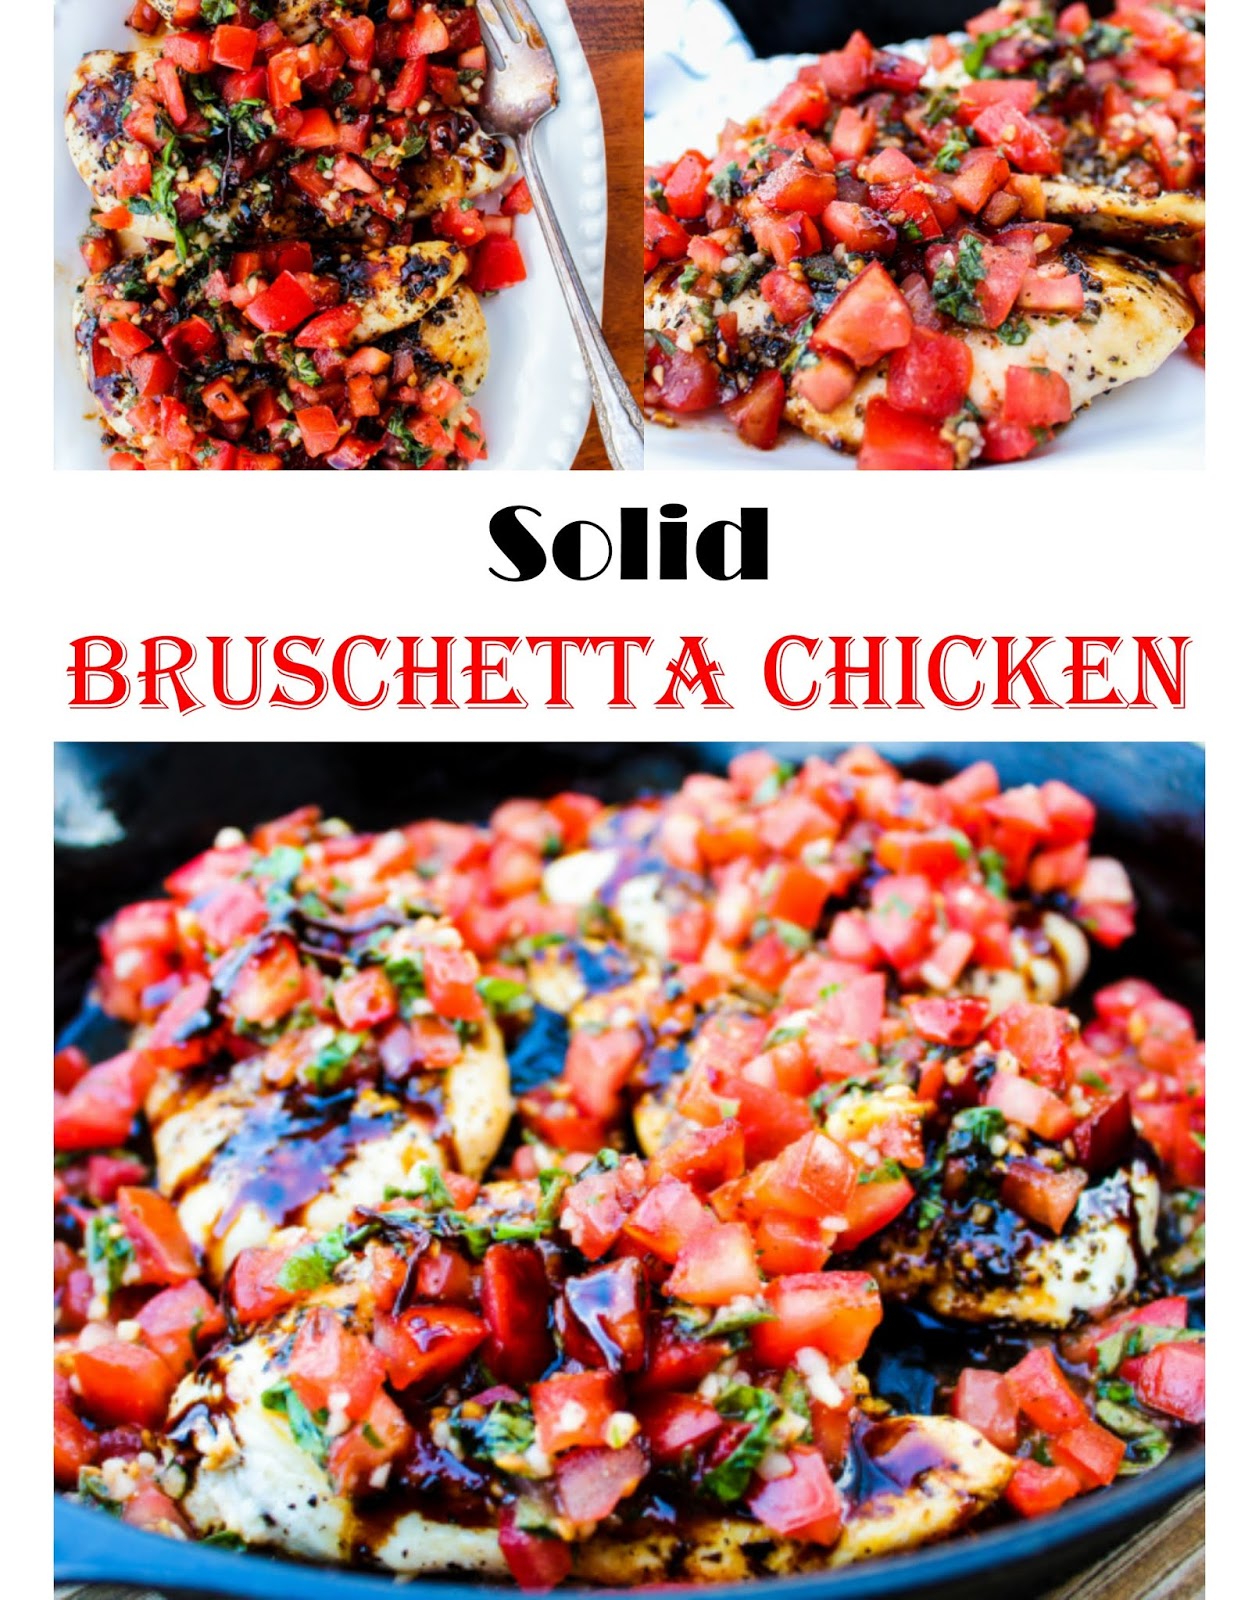 633 Reviews: THE BEST EVER #Recipes >> Solid BRUSCHETTA CHICKEN - #mgid ...